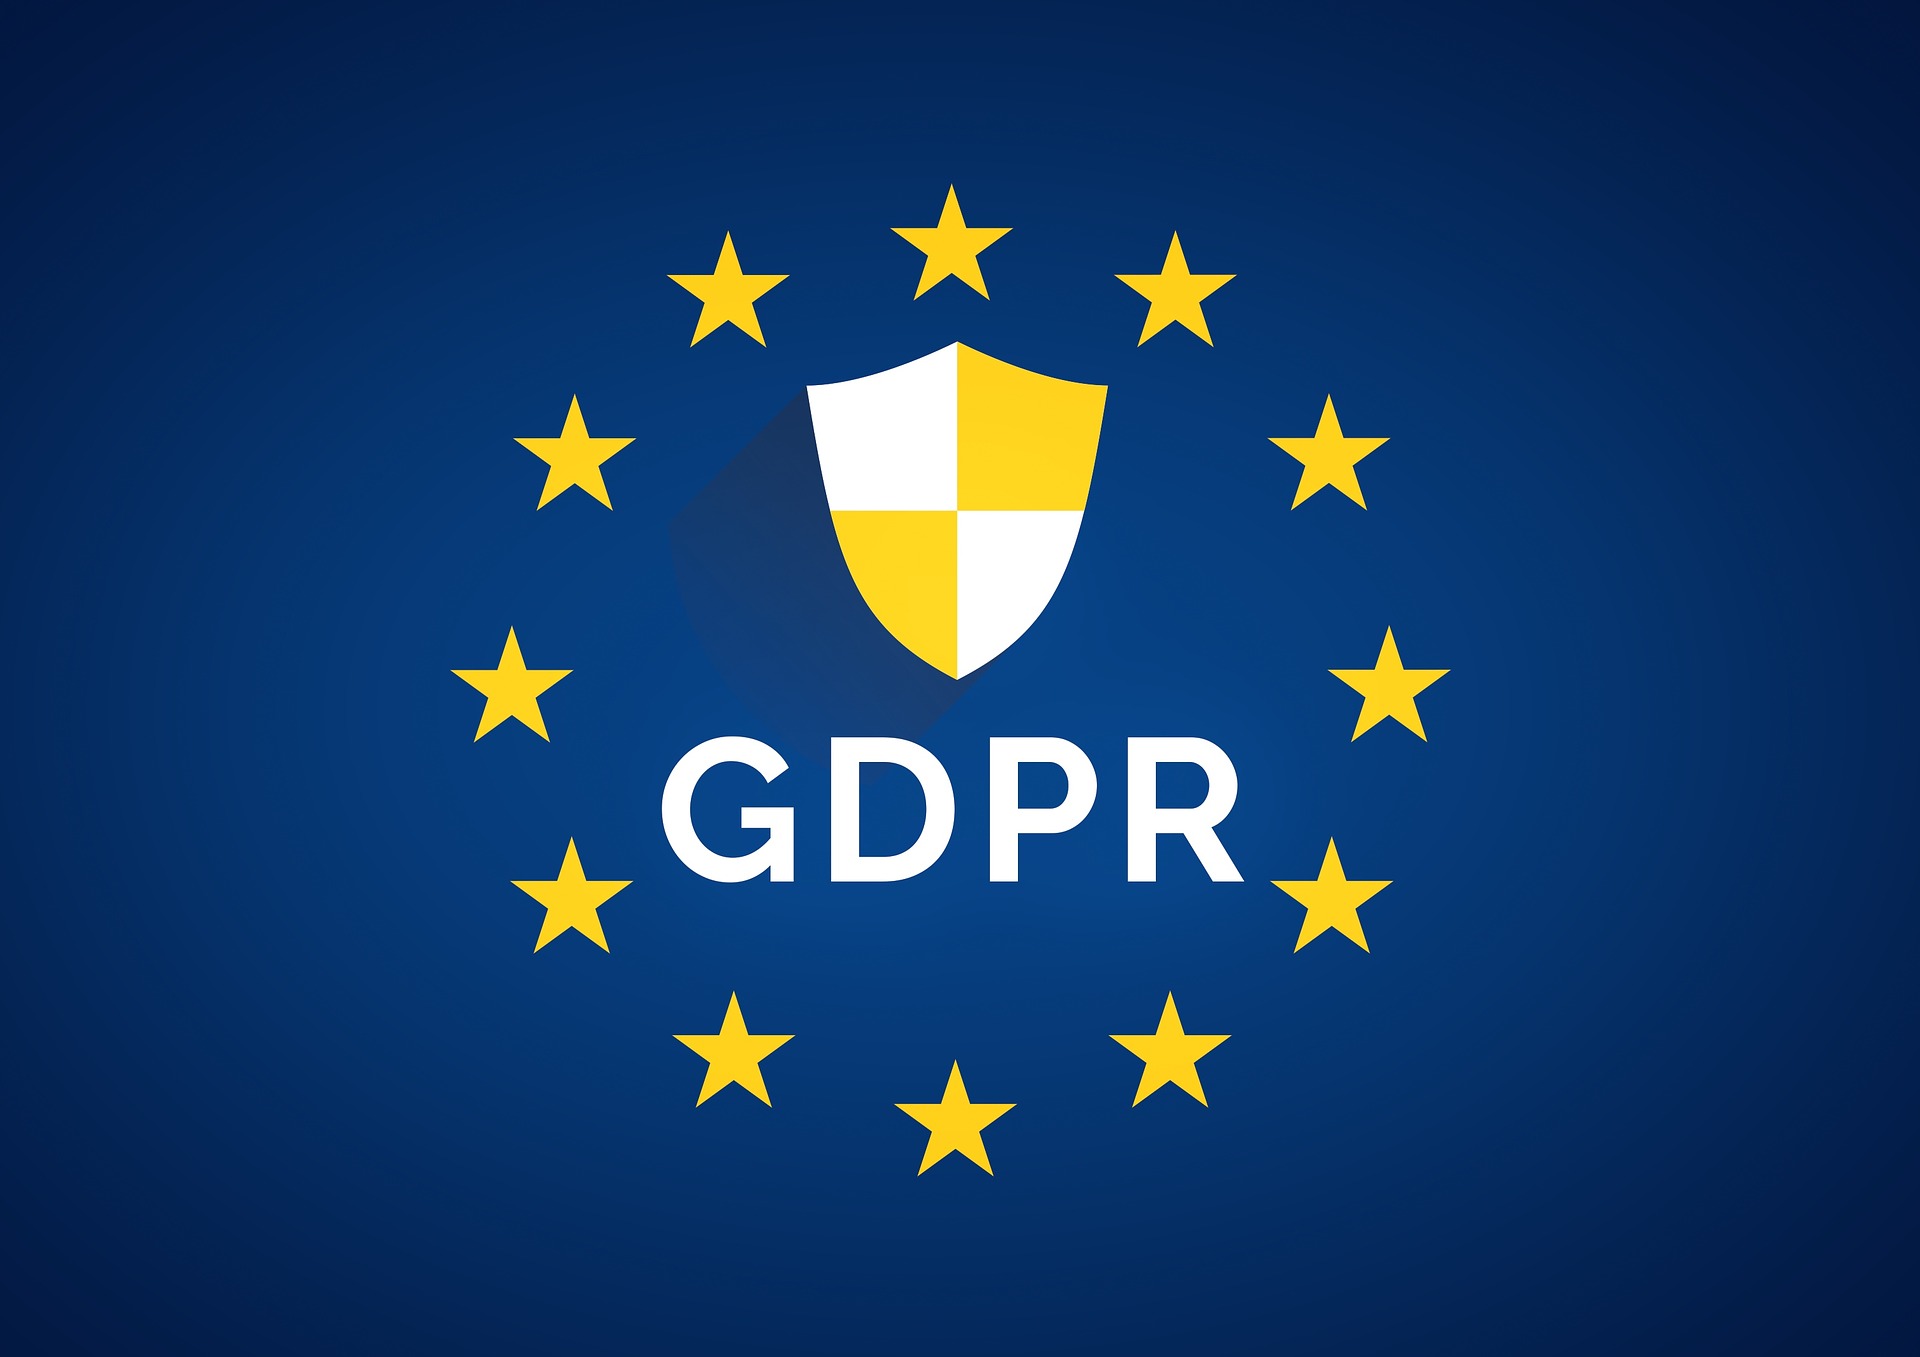 GDPR 01 – What is GDPR? An Executive Summary